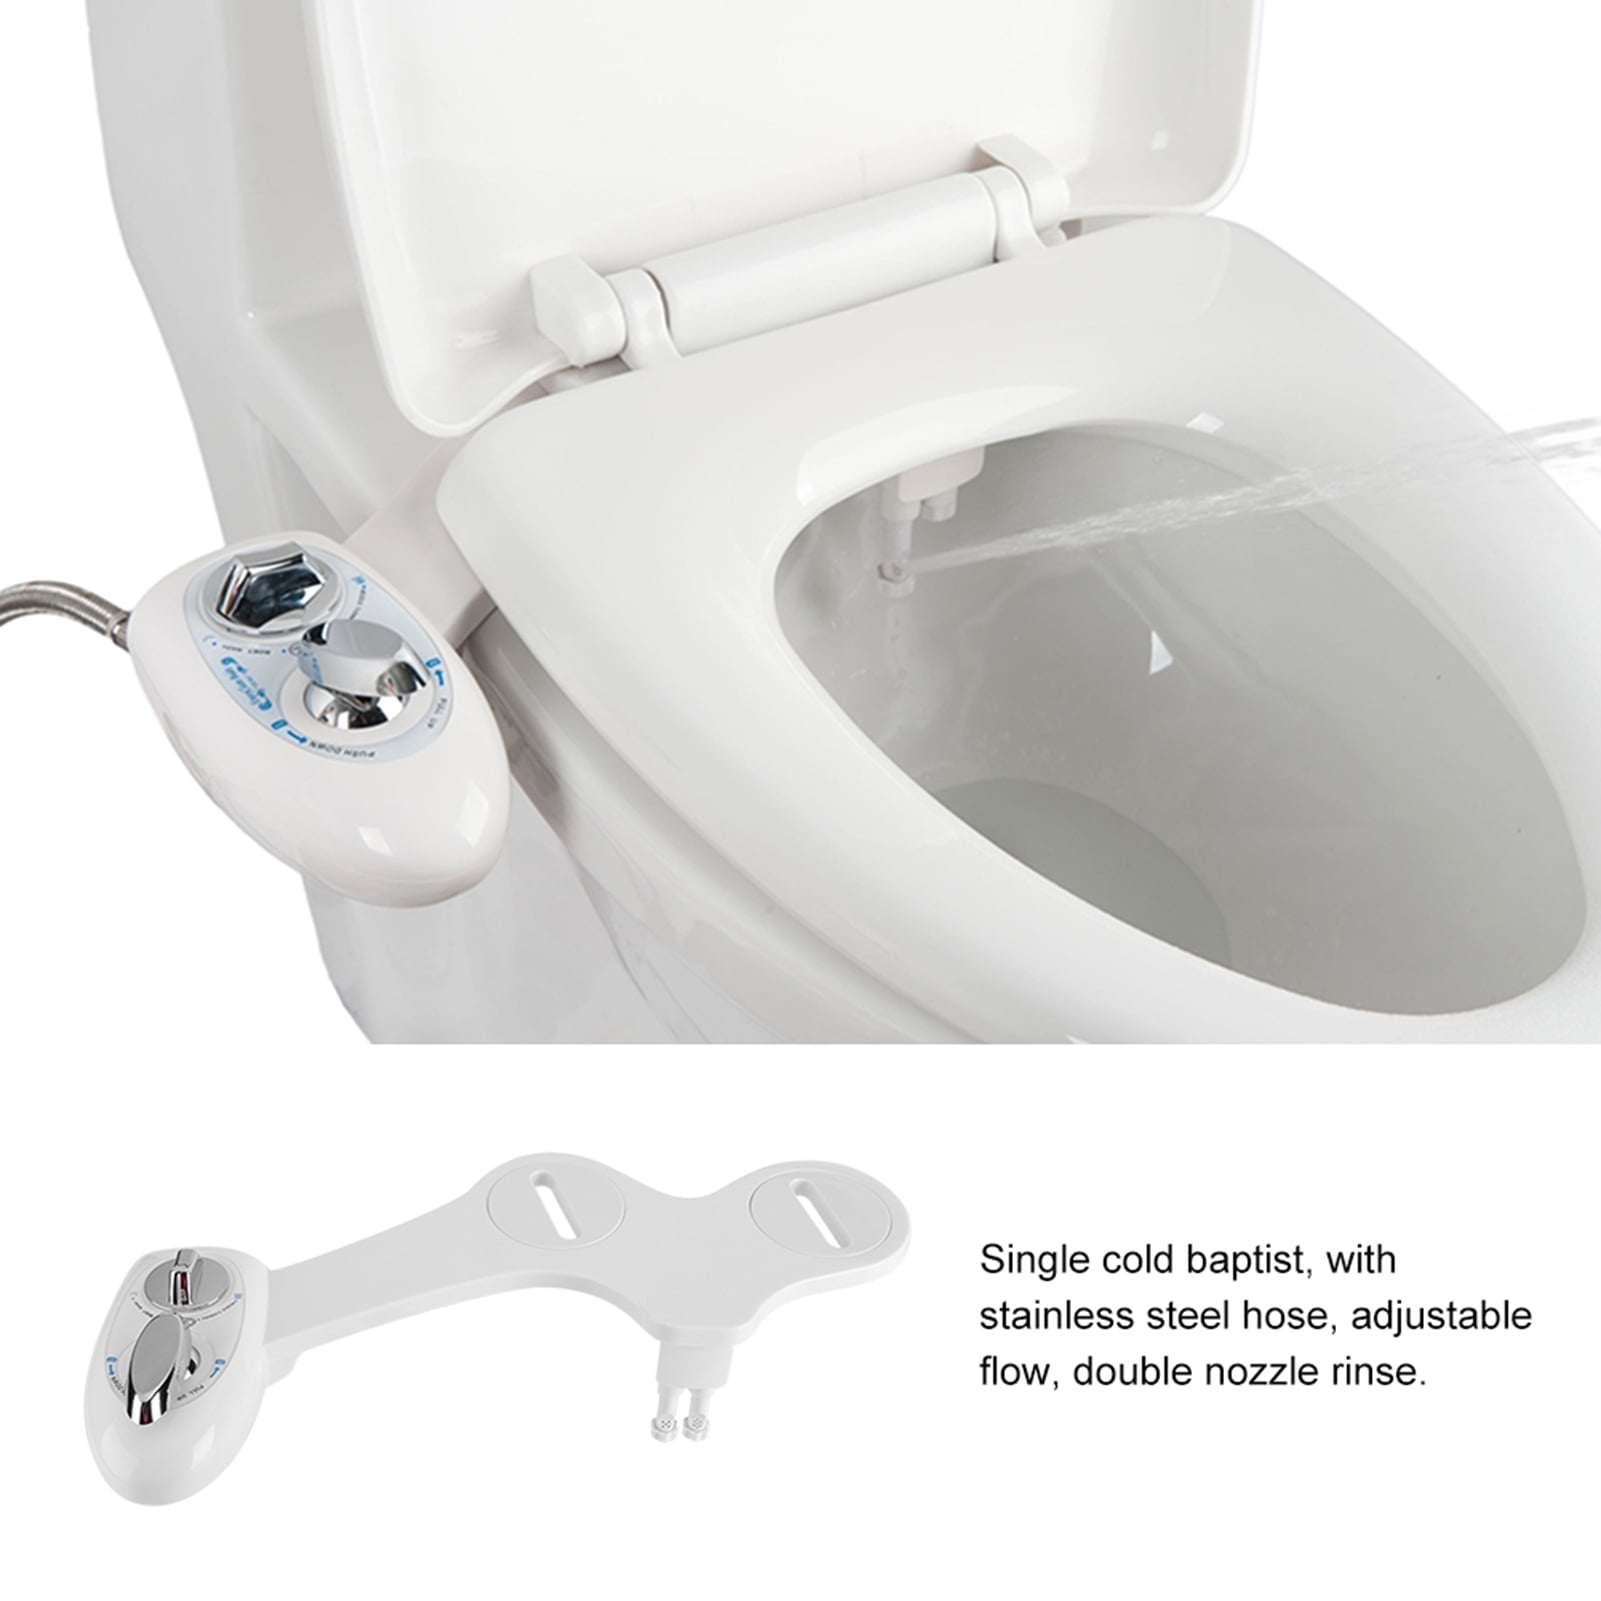 Water Automatic Adjustable Bidet Toilet Seat Attachment Double Nozzle Sprinkler 